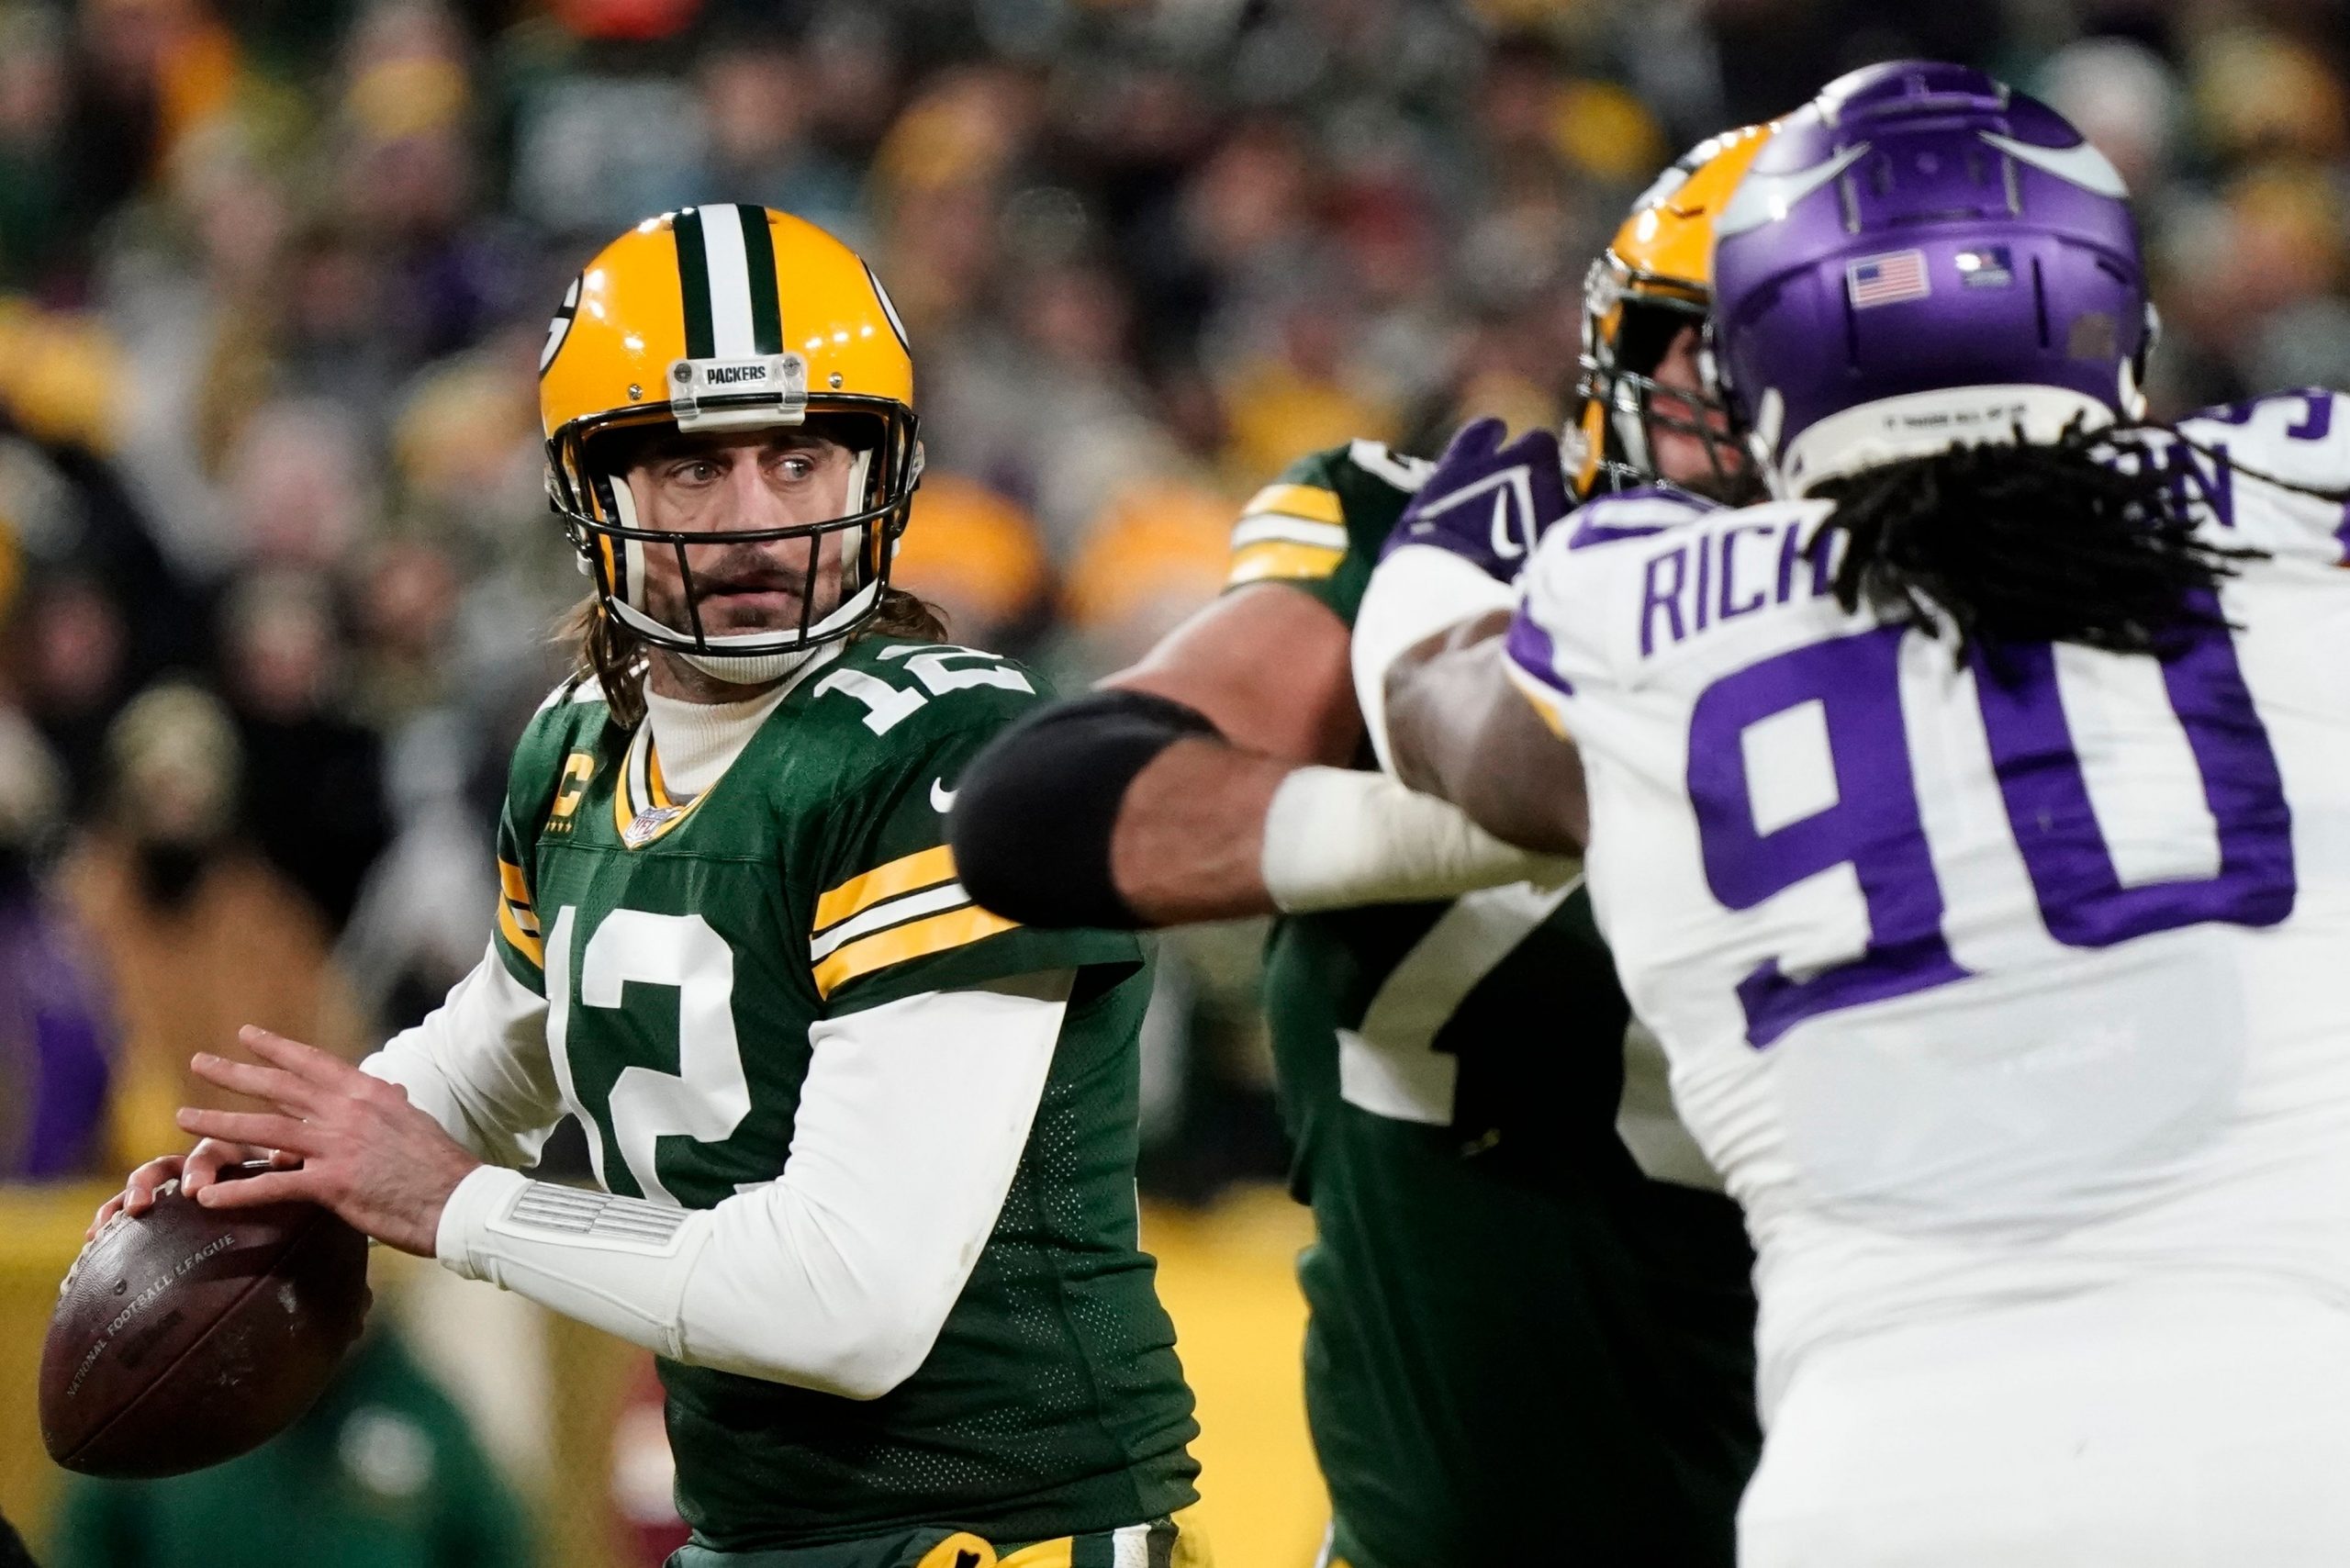 Green Bay Packers rout Minnesota Viking Vikings 37-10 in cold to take NFC’s No. 1 seed